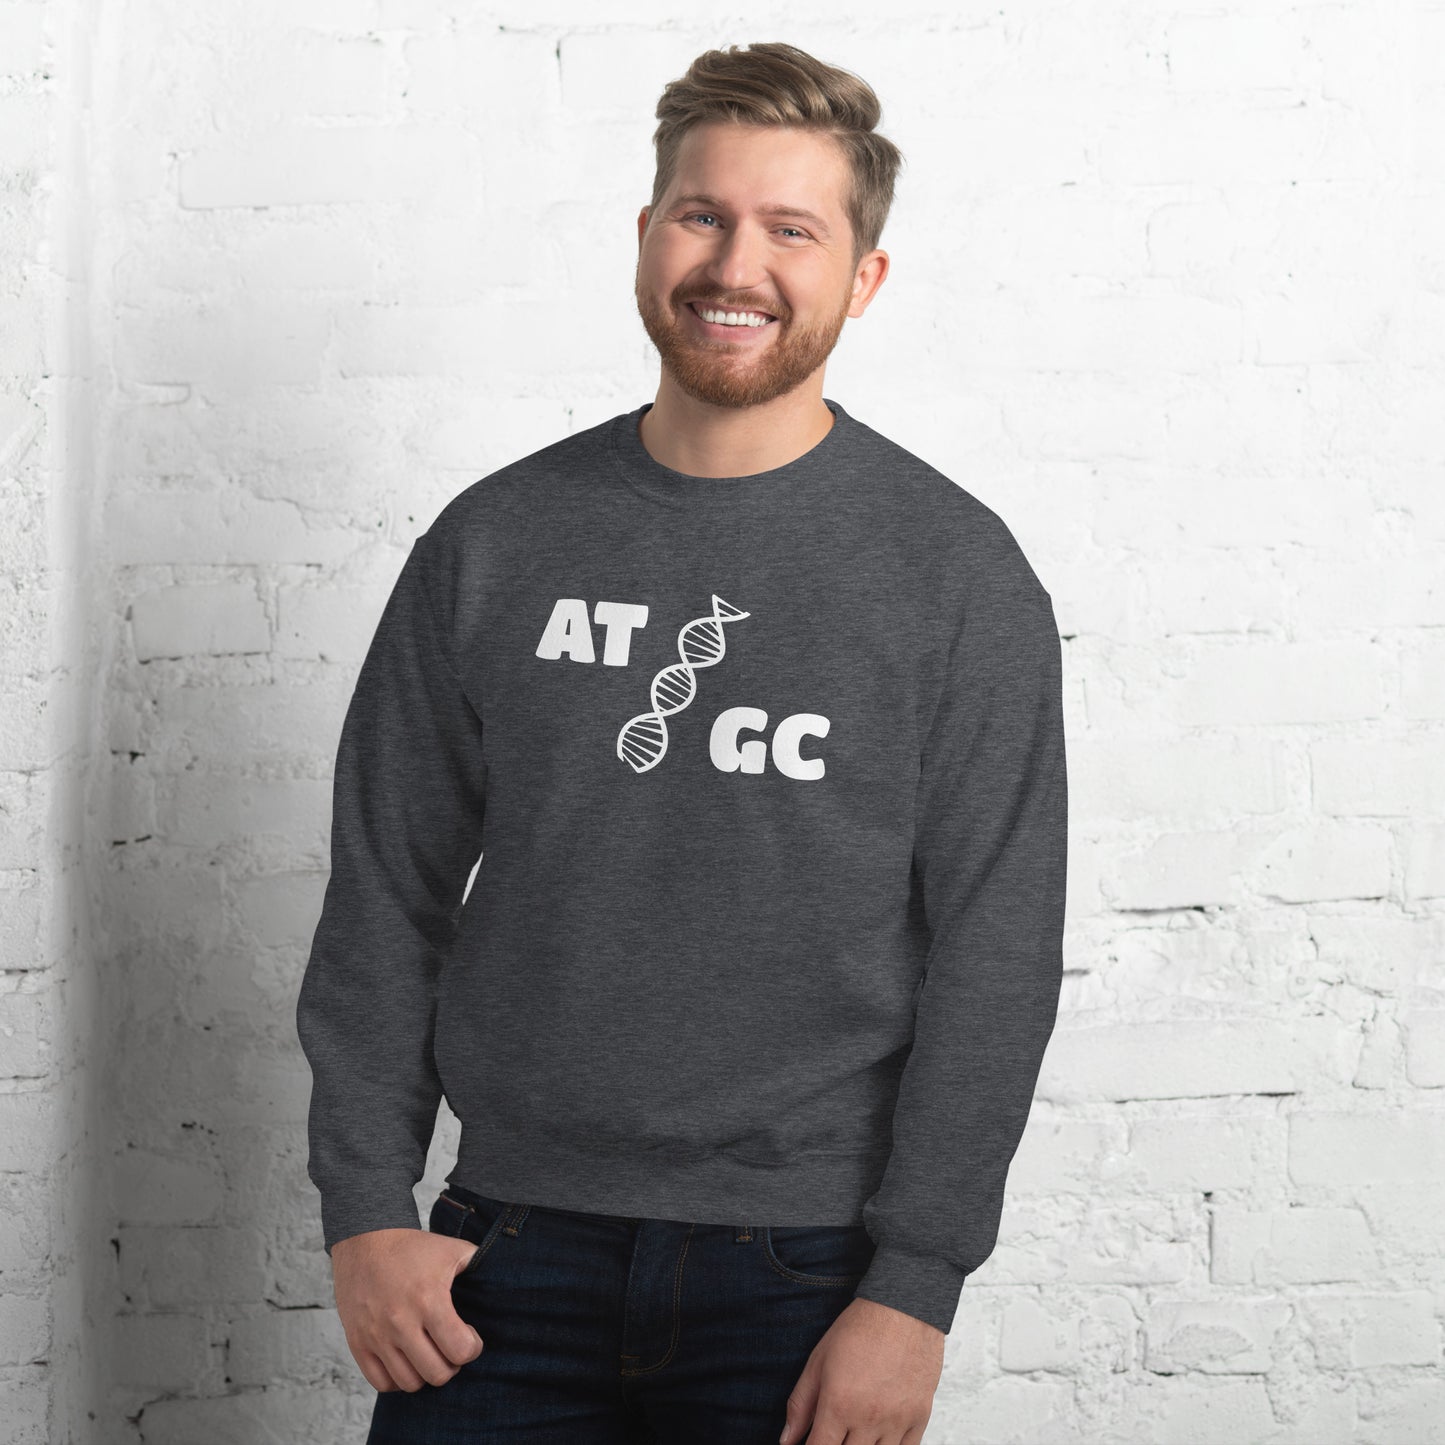 Men with dark grey sweatshirt with image of a DNA string and the text "ATGC"